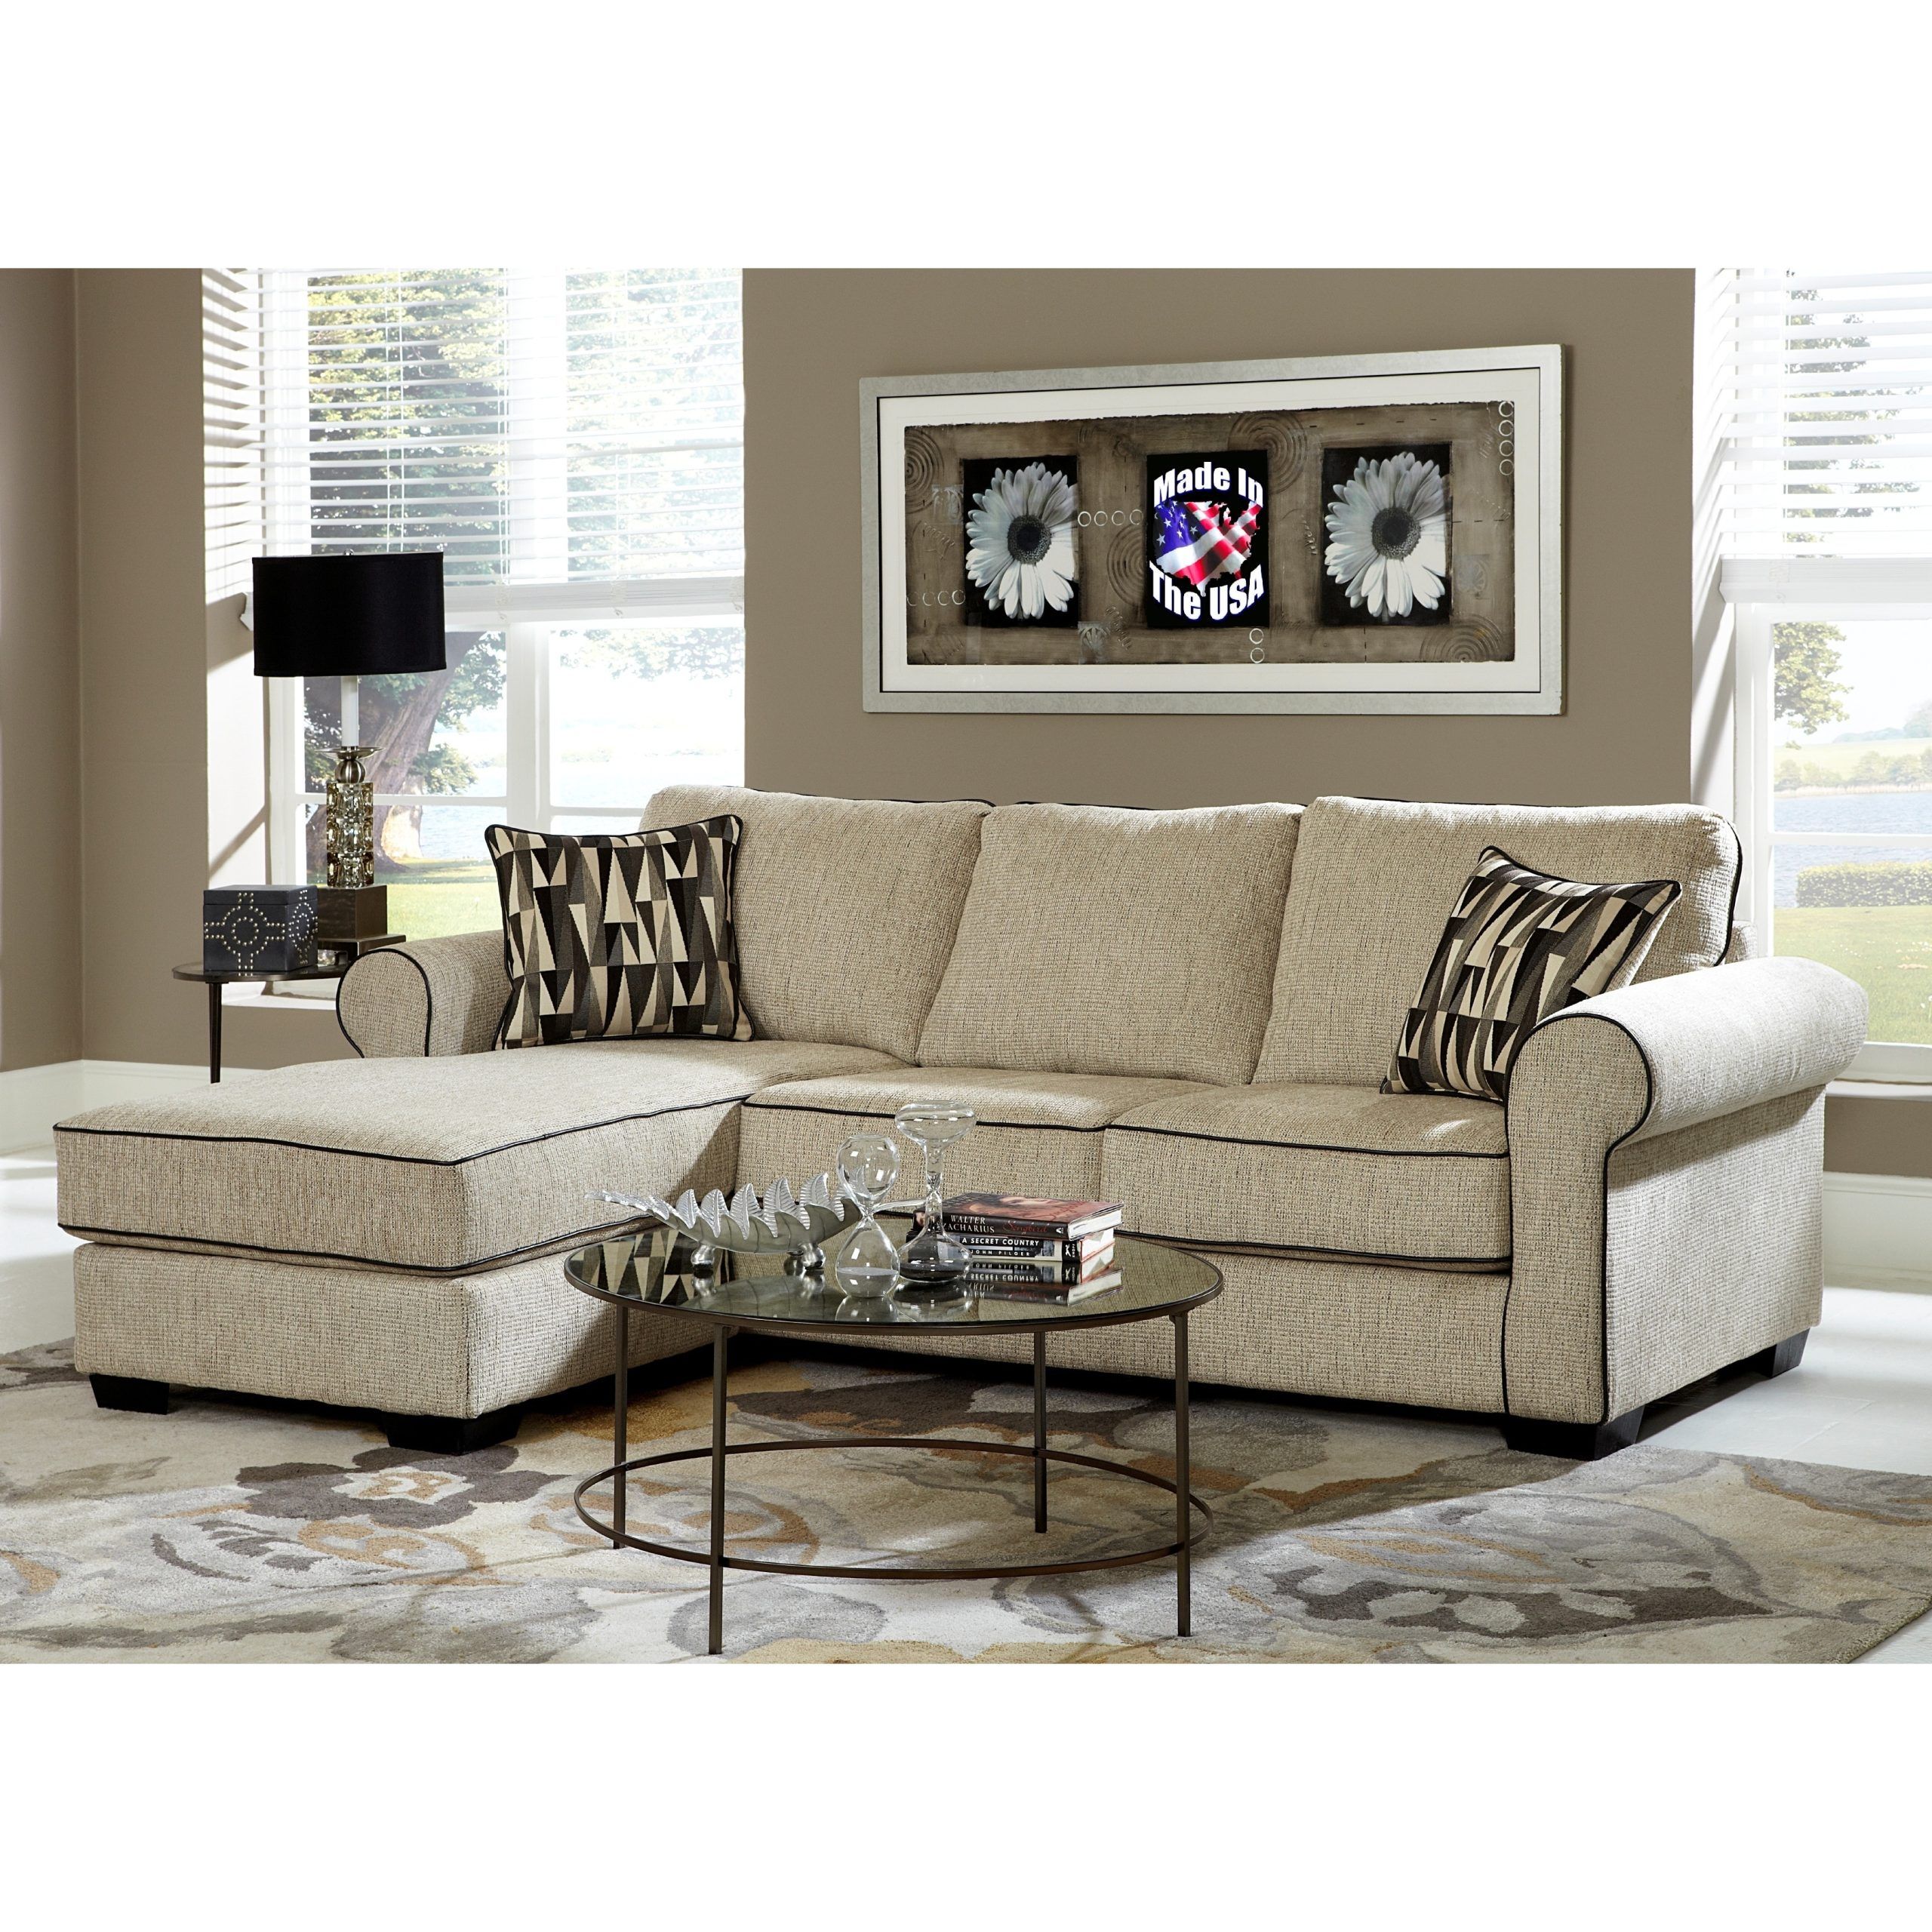 Shop Cream Chenille Reversible Sofa Chaise Sectional – Free Shipping With Regard To Chenille Sectional Sofas (Gallery 9 of 20)